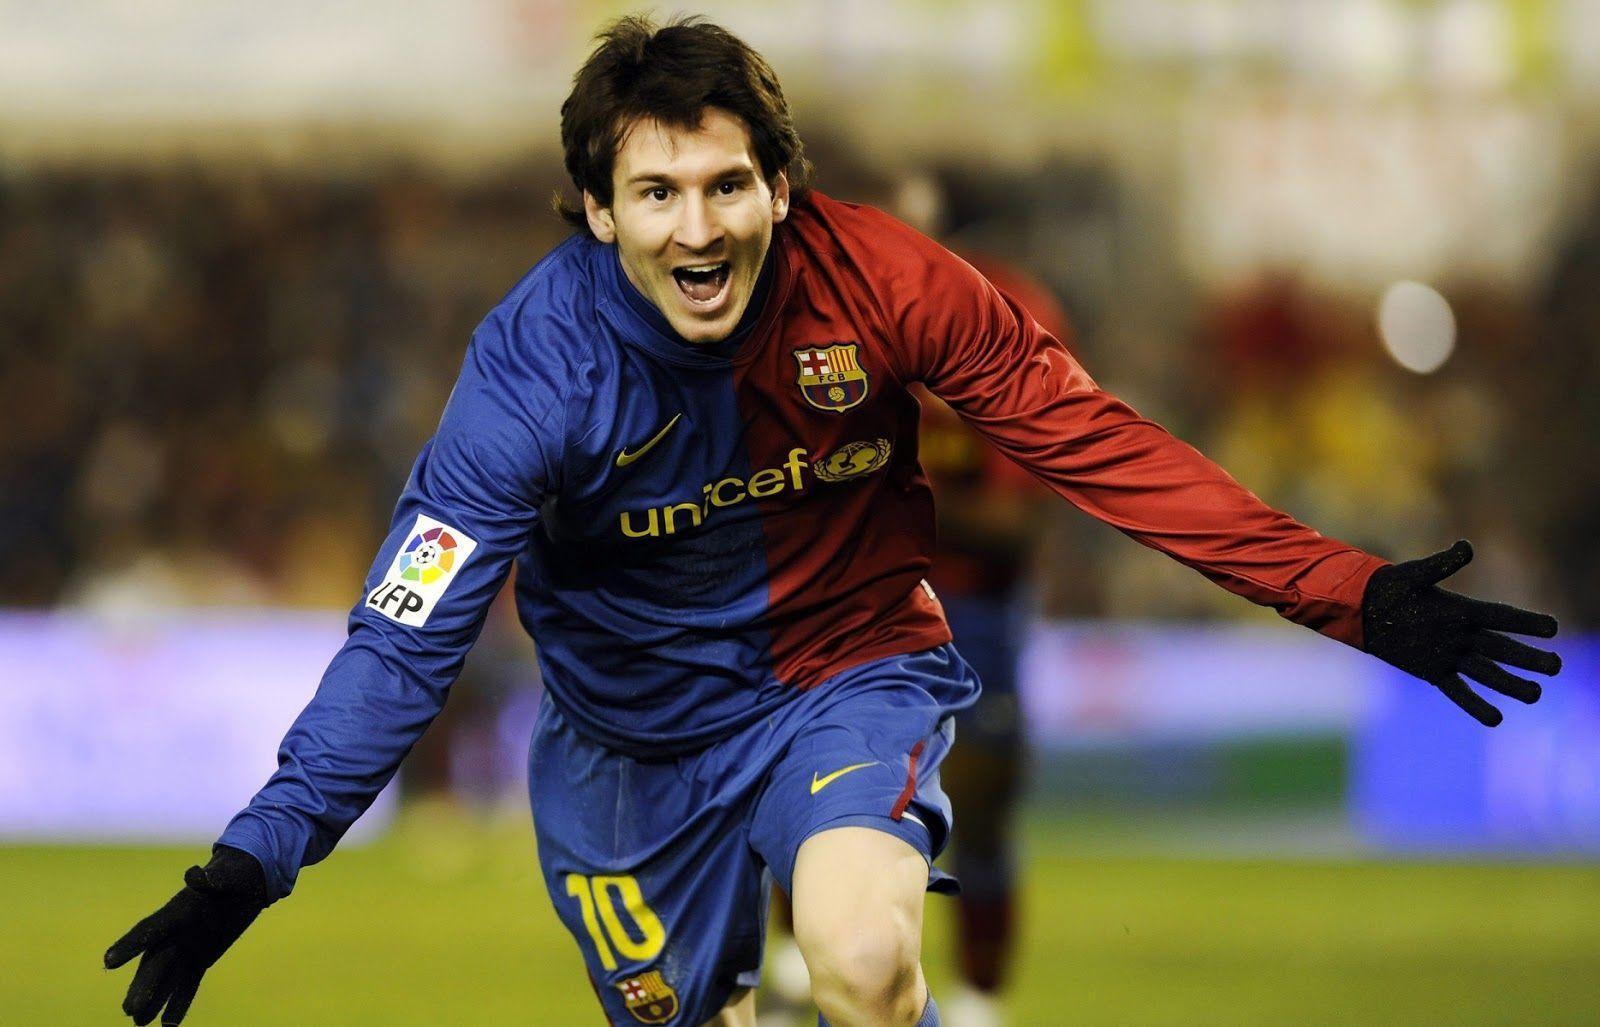 Best Lionel Messi Football player Image , Free Widescreen HD wallpapers